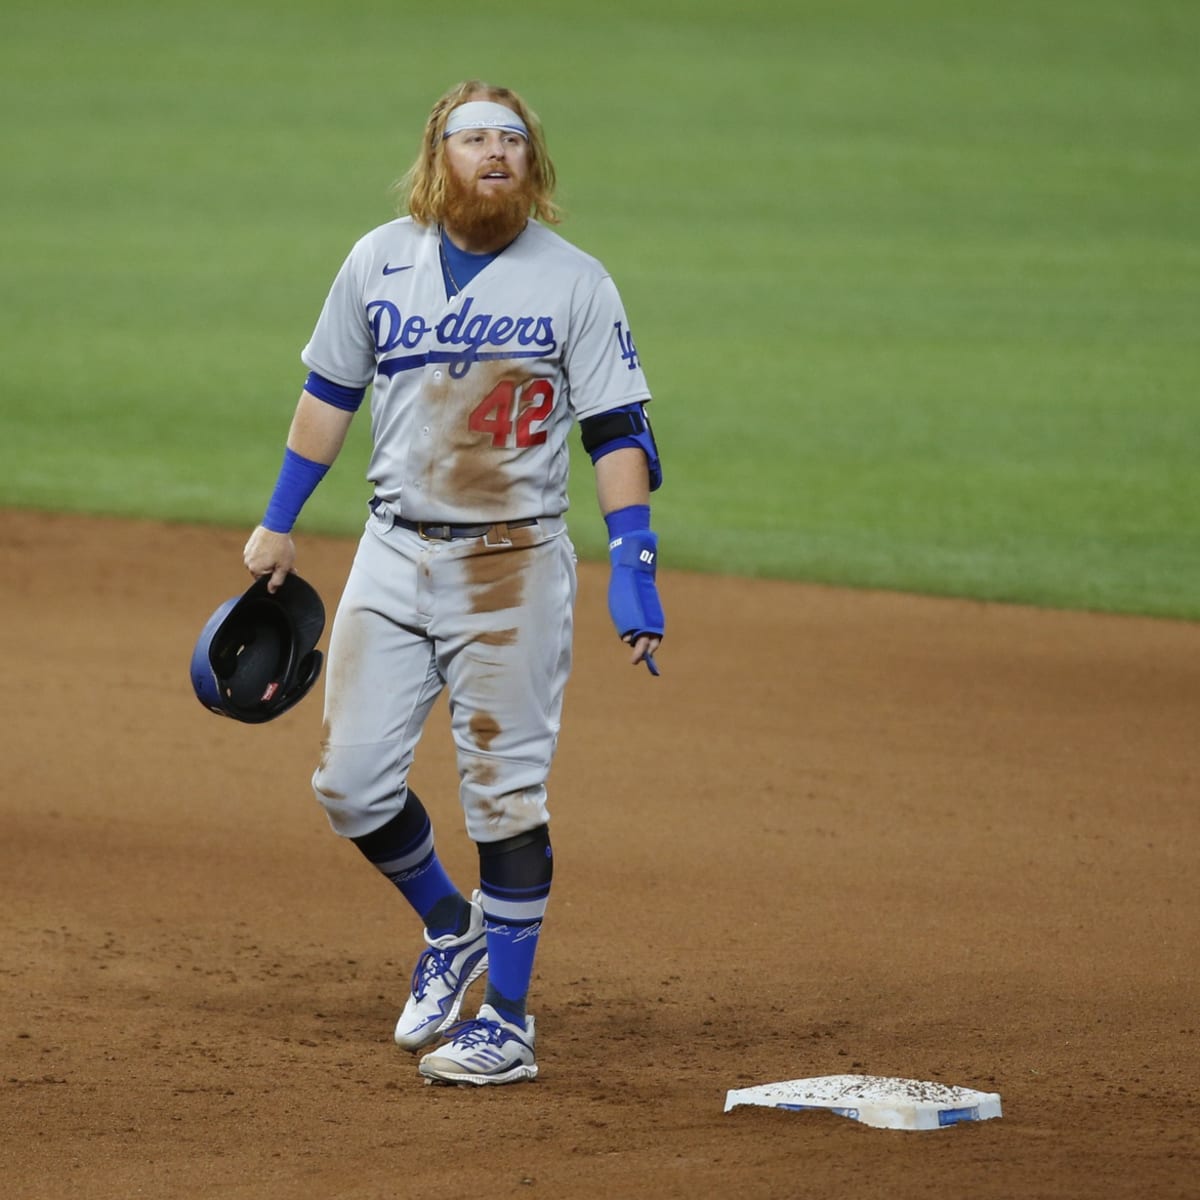 Dodgers instantly give Justin Turner's old No. 10 away in most random  fashion